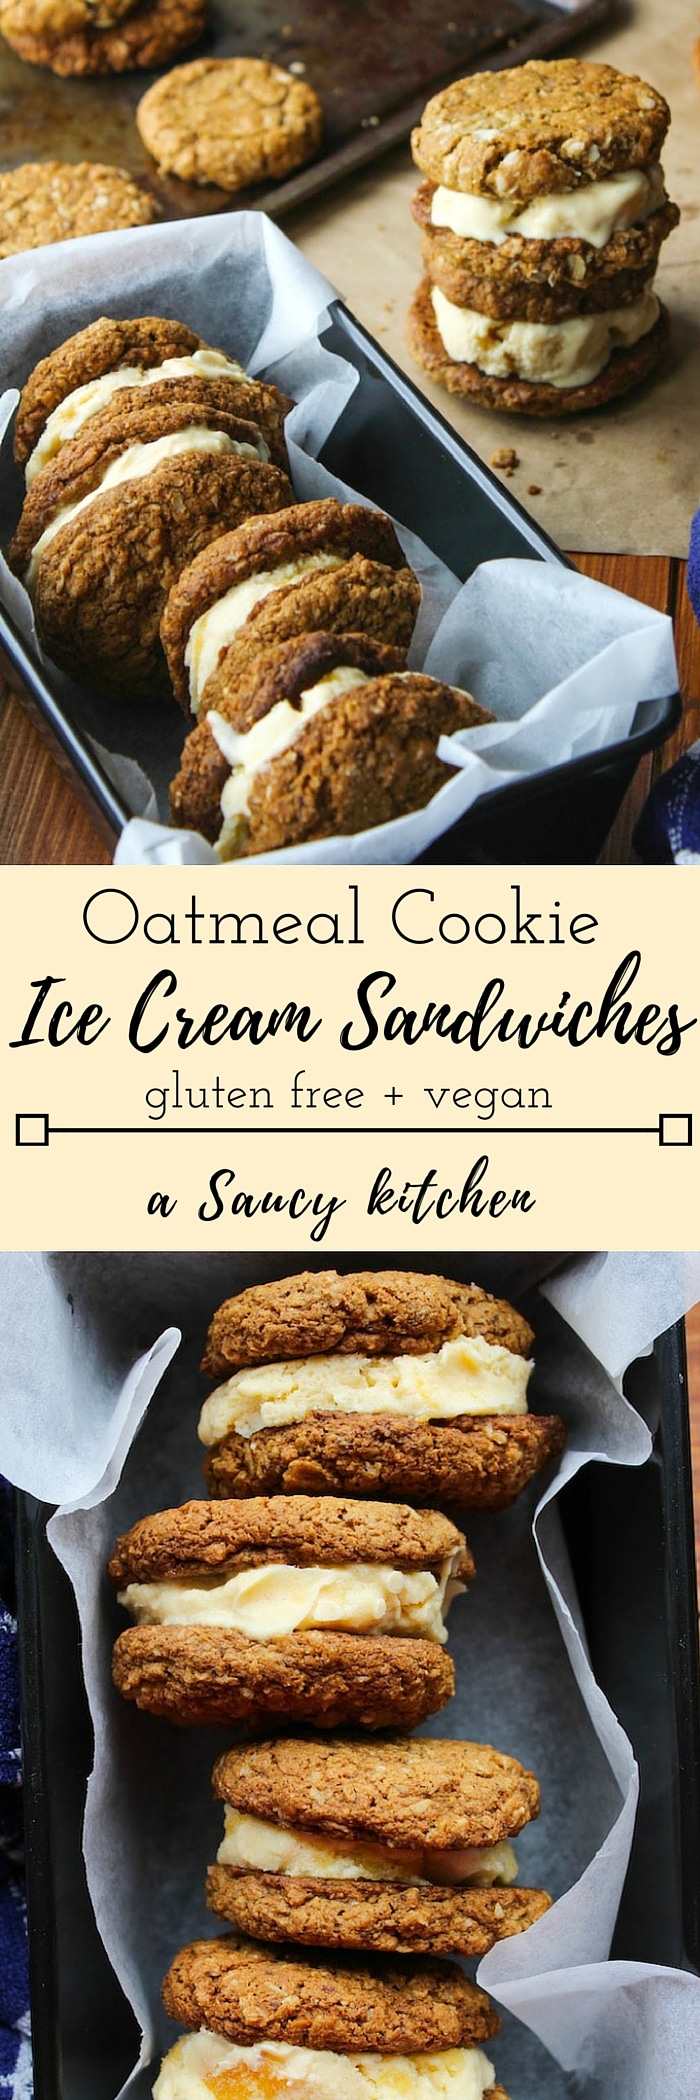 Gluten free & vegan oatmeal cookies - soft, chewy, and perfect for turning into ice cream cookie sandwiches.